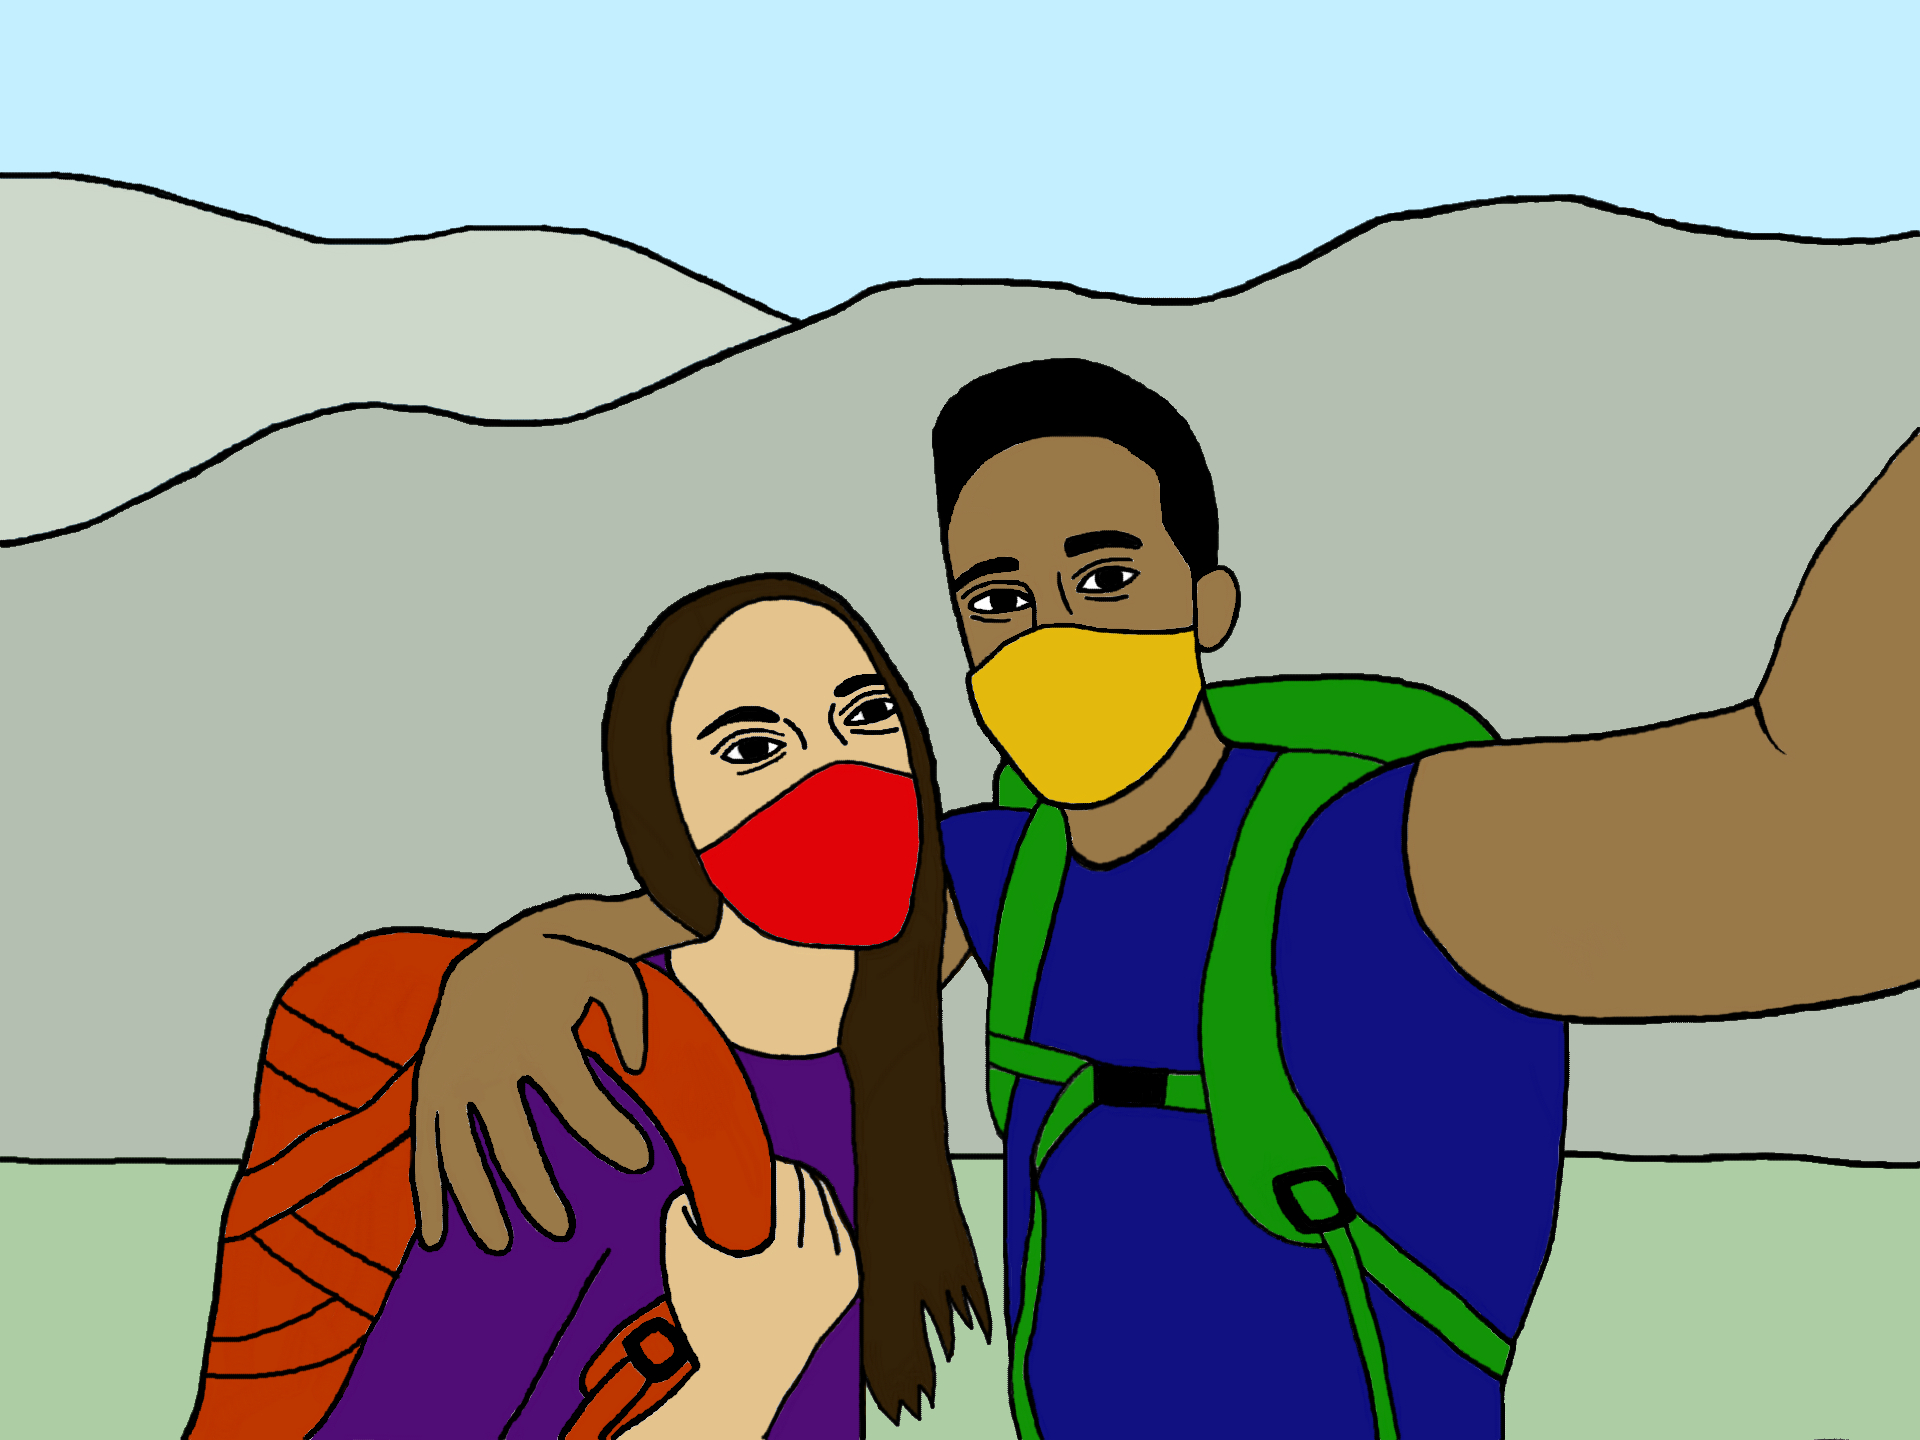 Illustration of two students taking a selfie while wearing hiking gear and face masks.